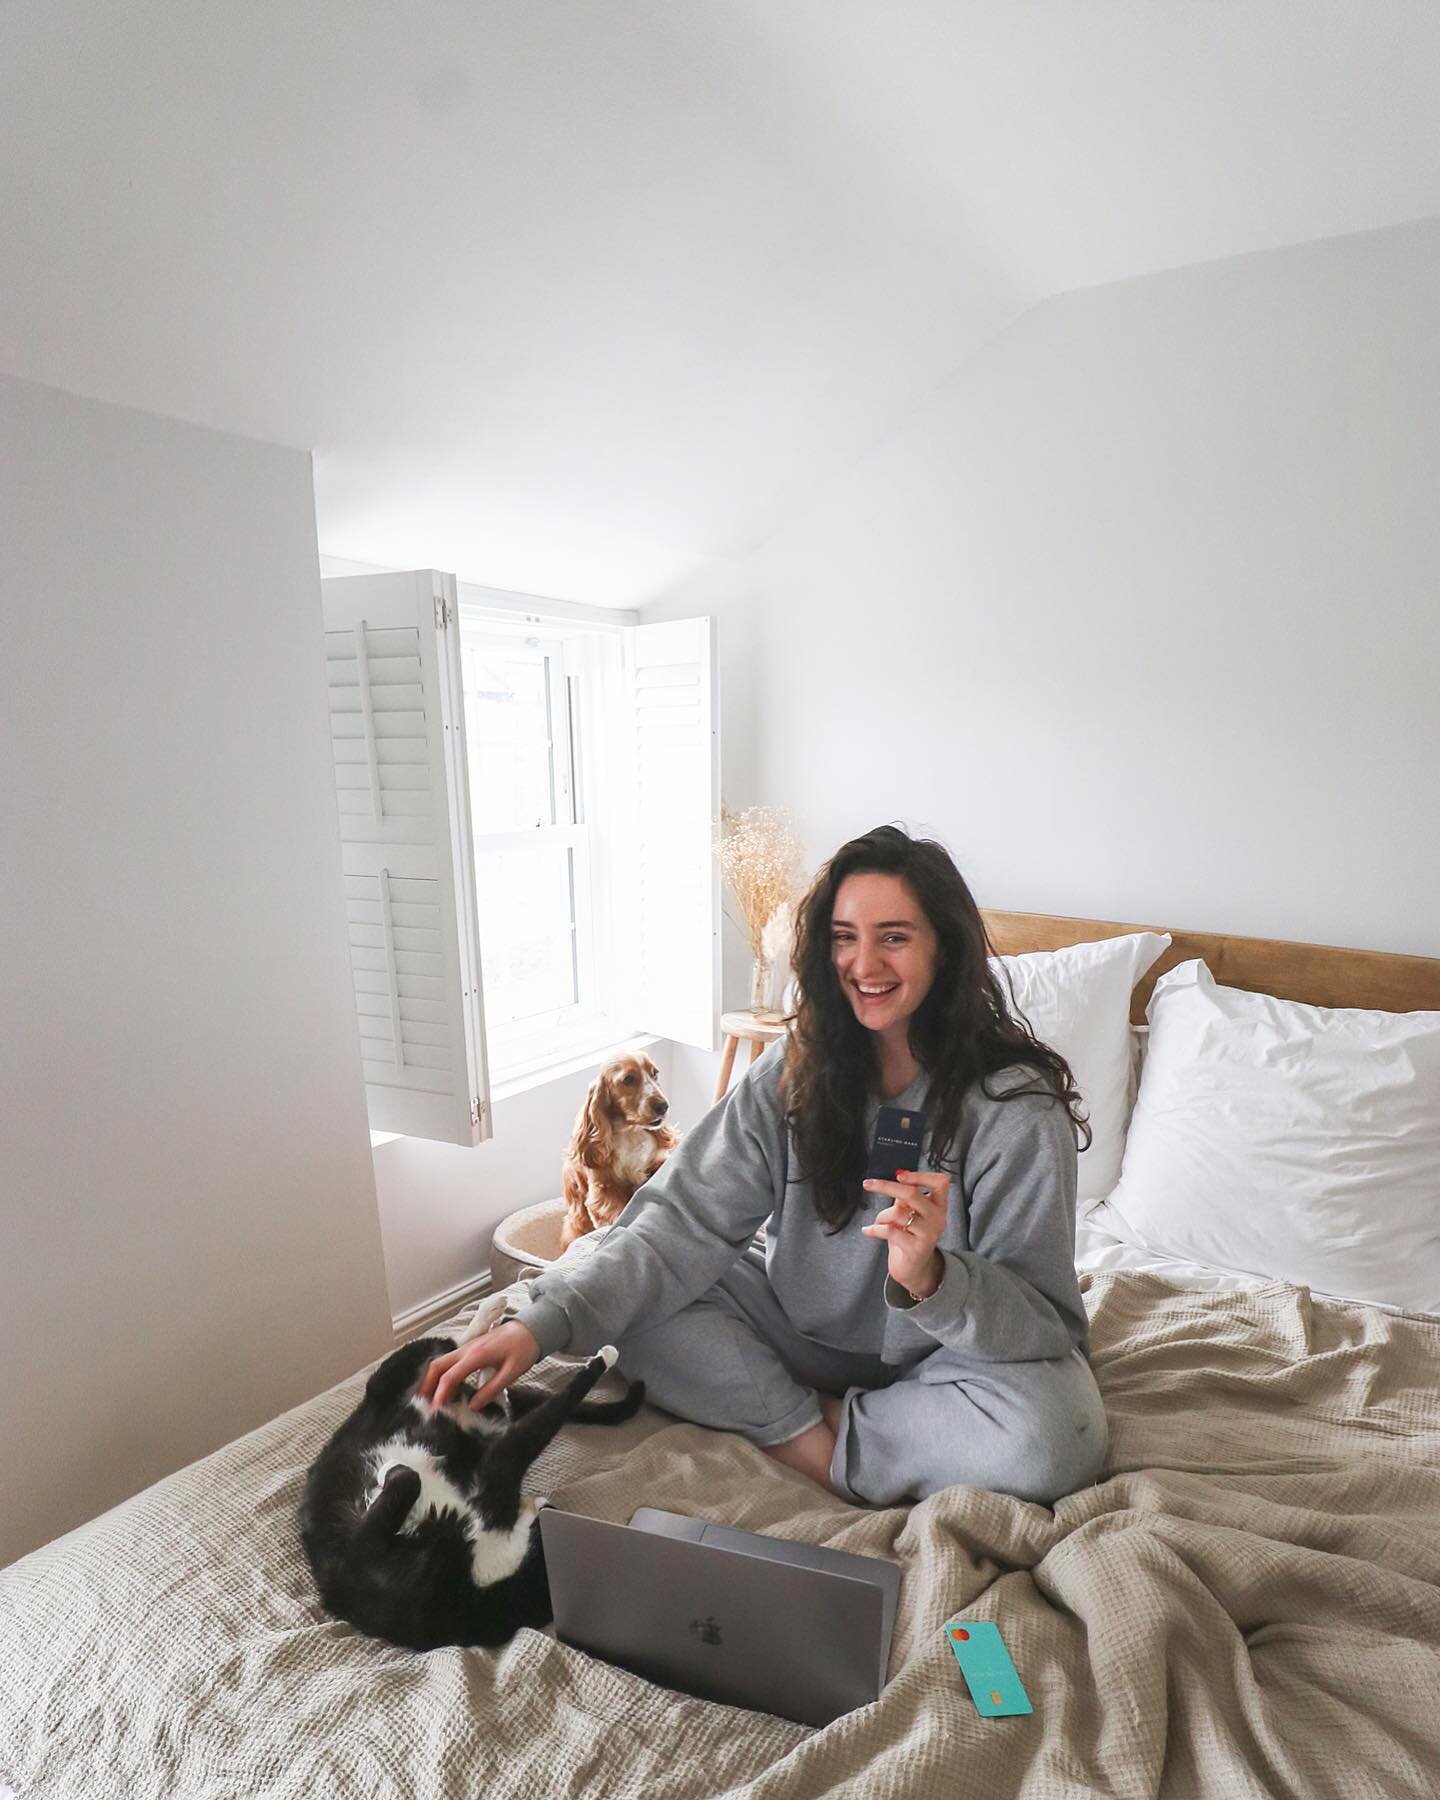 #ad Working from home is hard with all these fluffy distractions 🐱🐶 I&rsquo;ve been dedicated to learning more about finance recently and wanted to share about ethical and sustainable banking. 
I switched to @starlingbank around three years ago whe